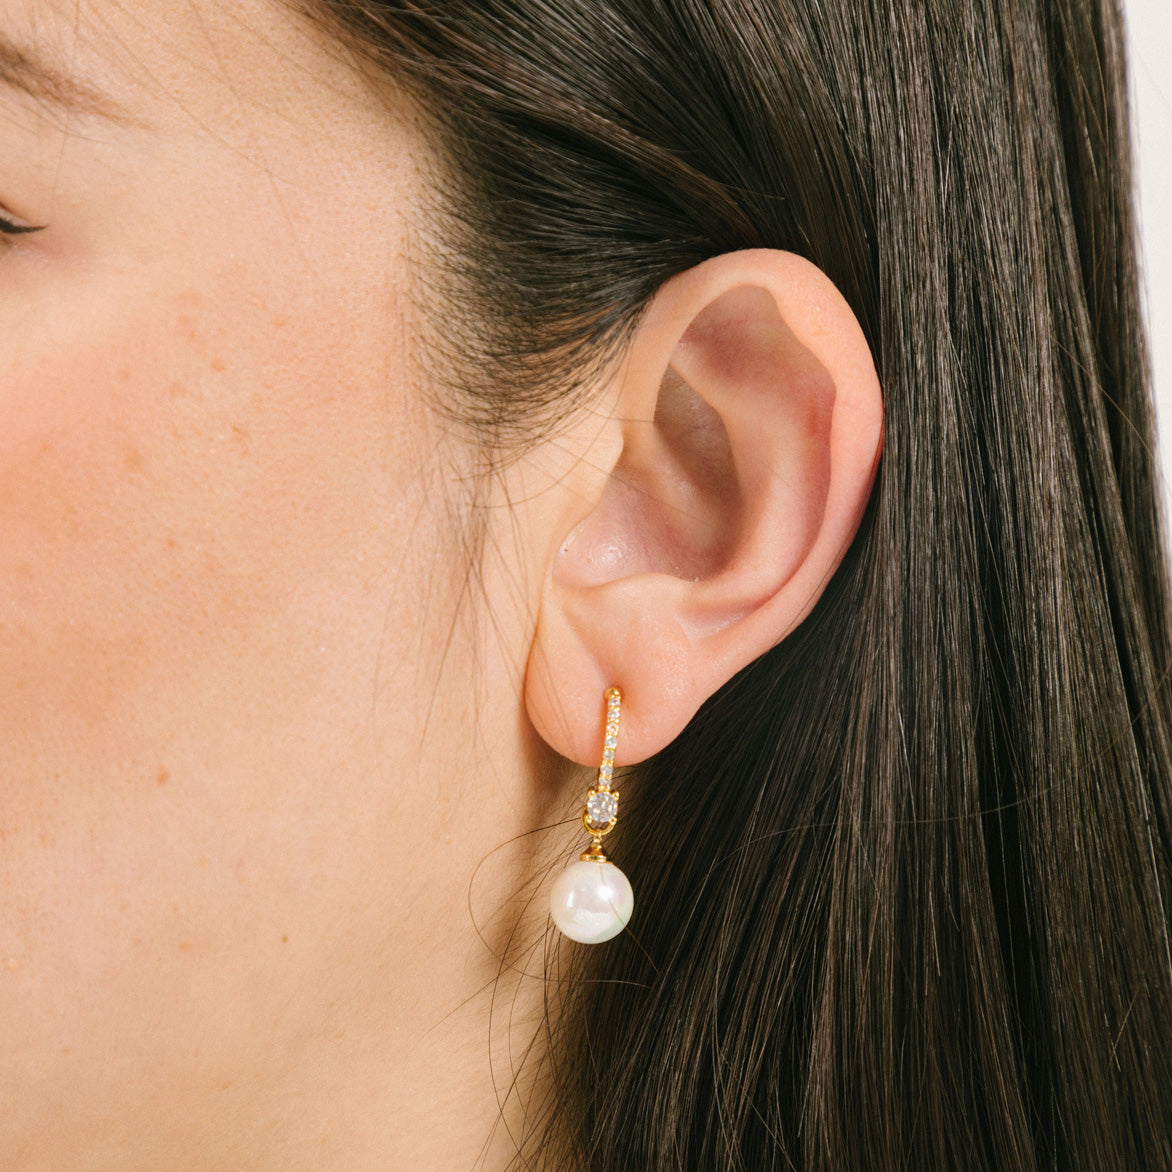 A model wearing the Claire Pearl Clip On Earrings in Gold bear Mosquito Coil Clip-Ons, offering a secure, comfortable fit for all types of ears - from Thick/Large to Sensitive, Small/Thin, and even Stretched/Healing - for up to 24 hours. Meticulously fashioned from 18K Gold plated metal alloy, Cubic Zirconia, and Simulated Faux Pearl, this chic design is Non-Tarnish and Water Resistant.